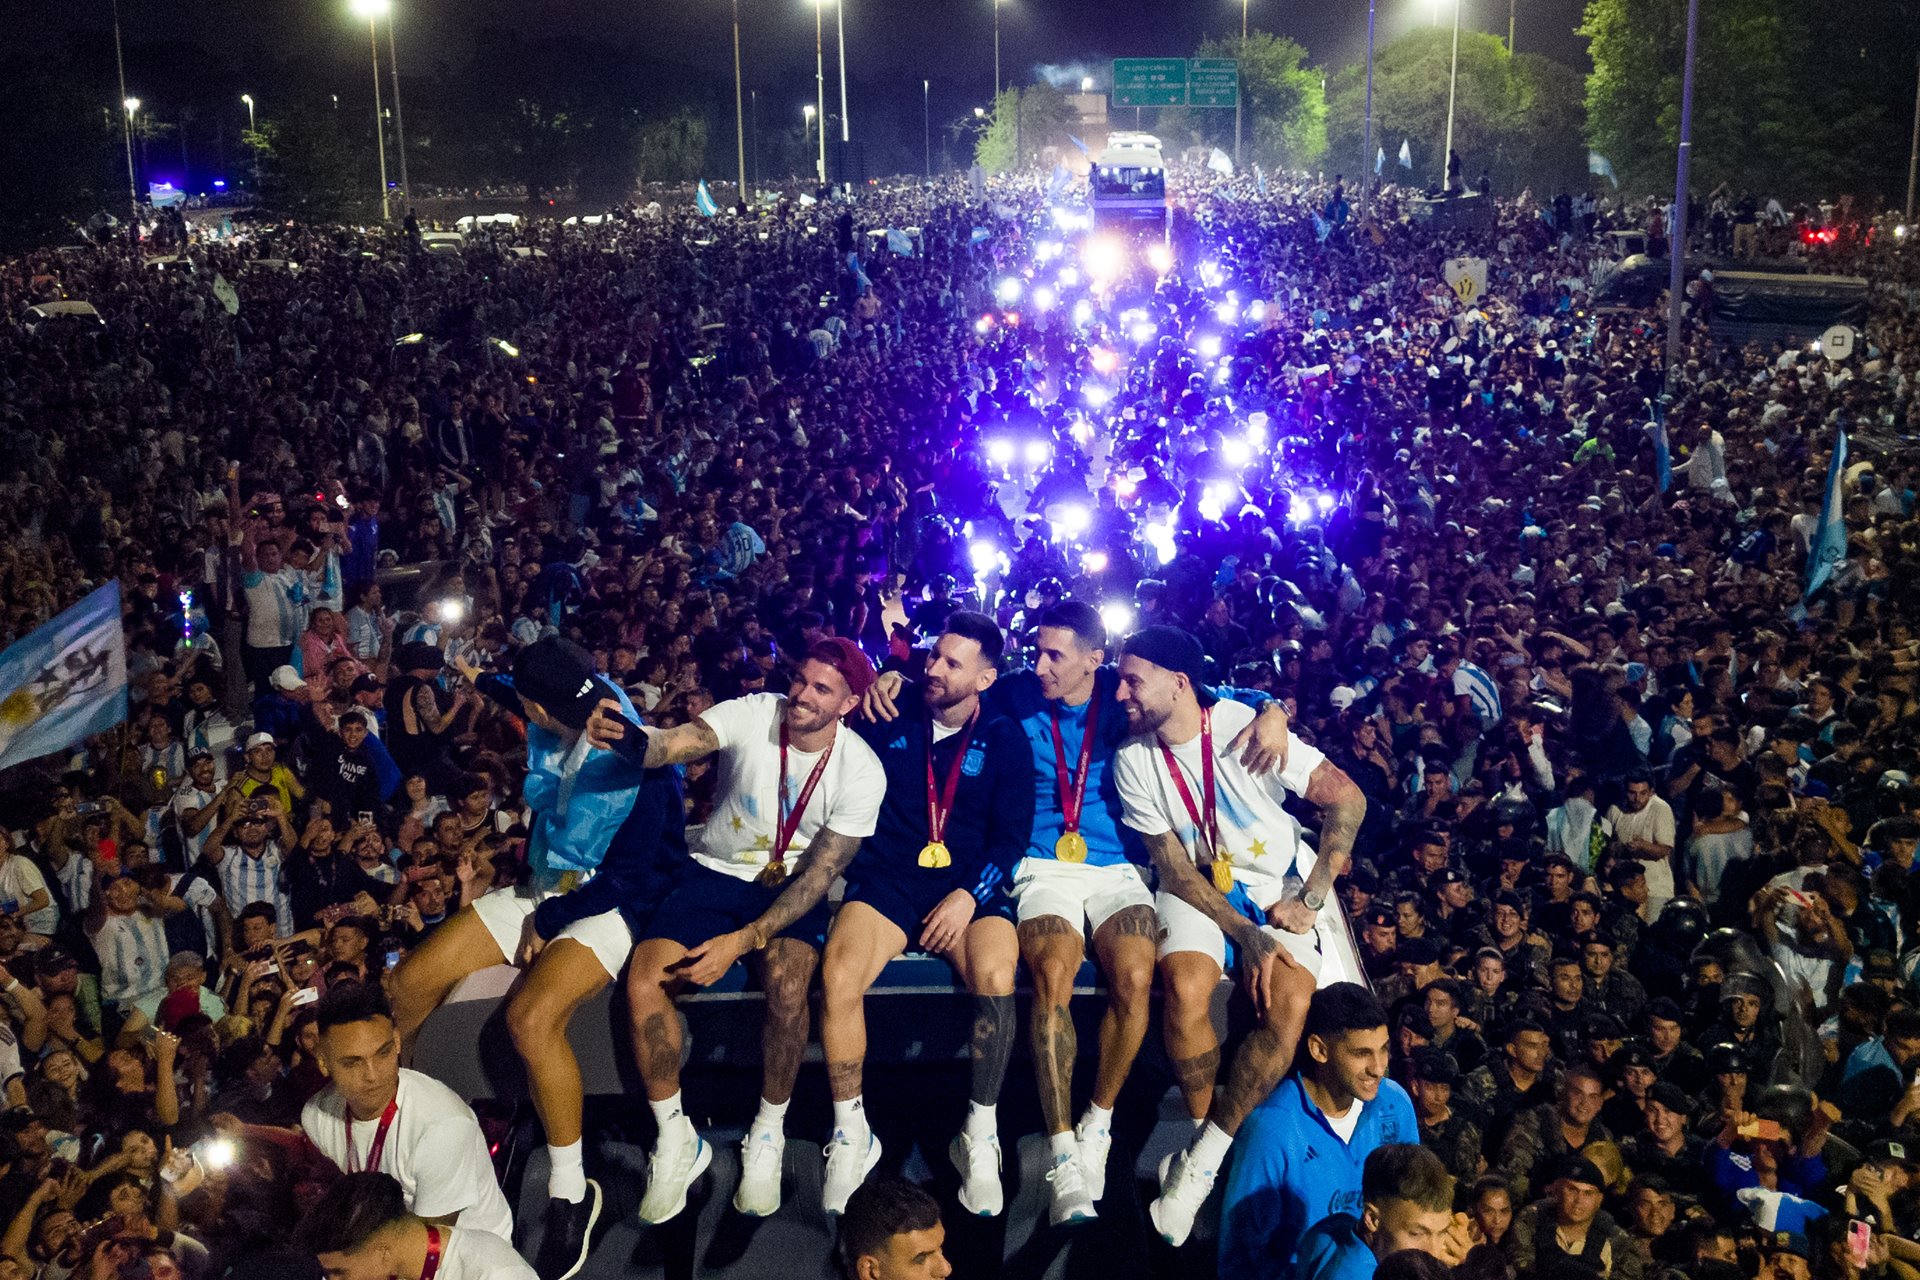 Argentina&rsquo;s captain and forward Lionel Messi takes a selfie with teammates on board the team bus during the victory parade in Buenos Aires, Argentina.